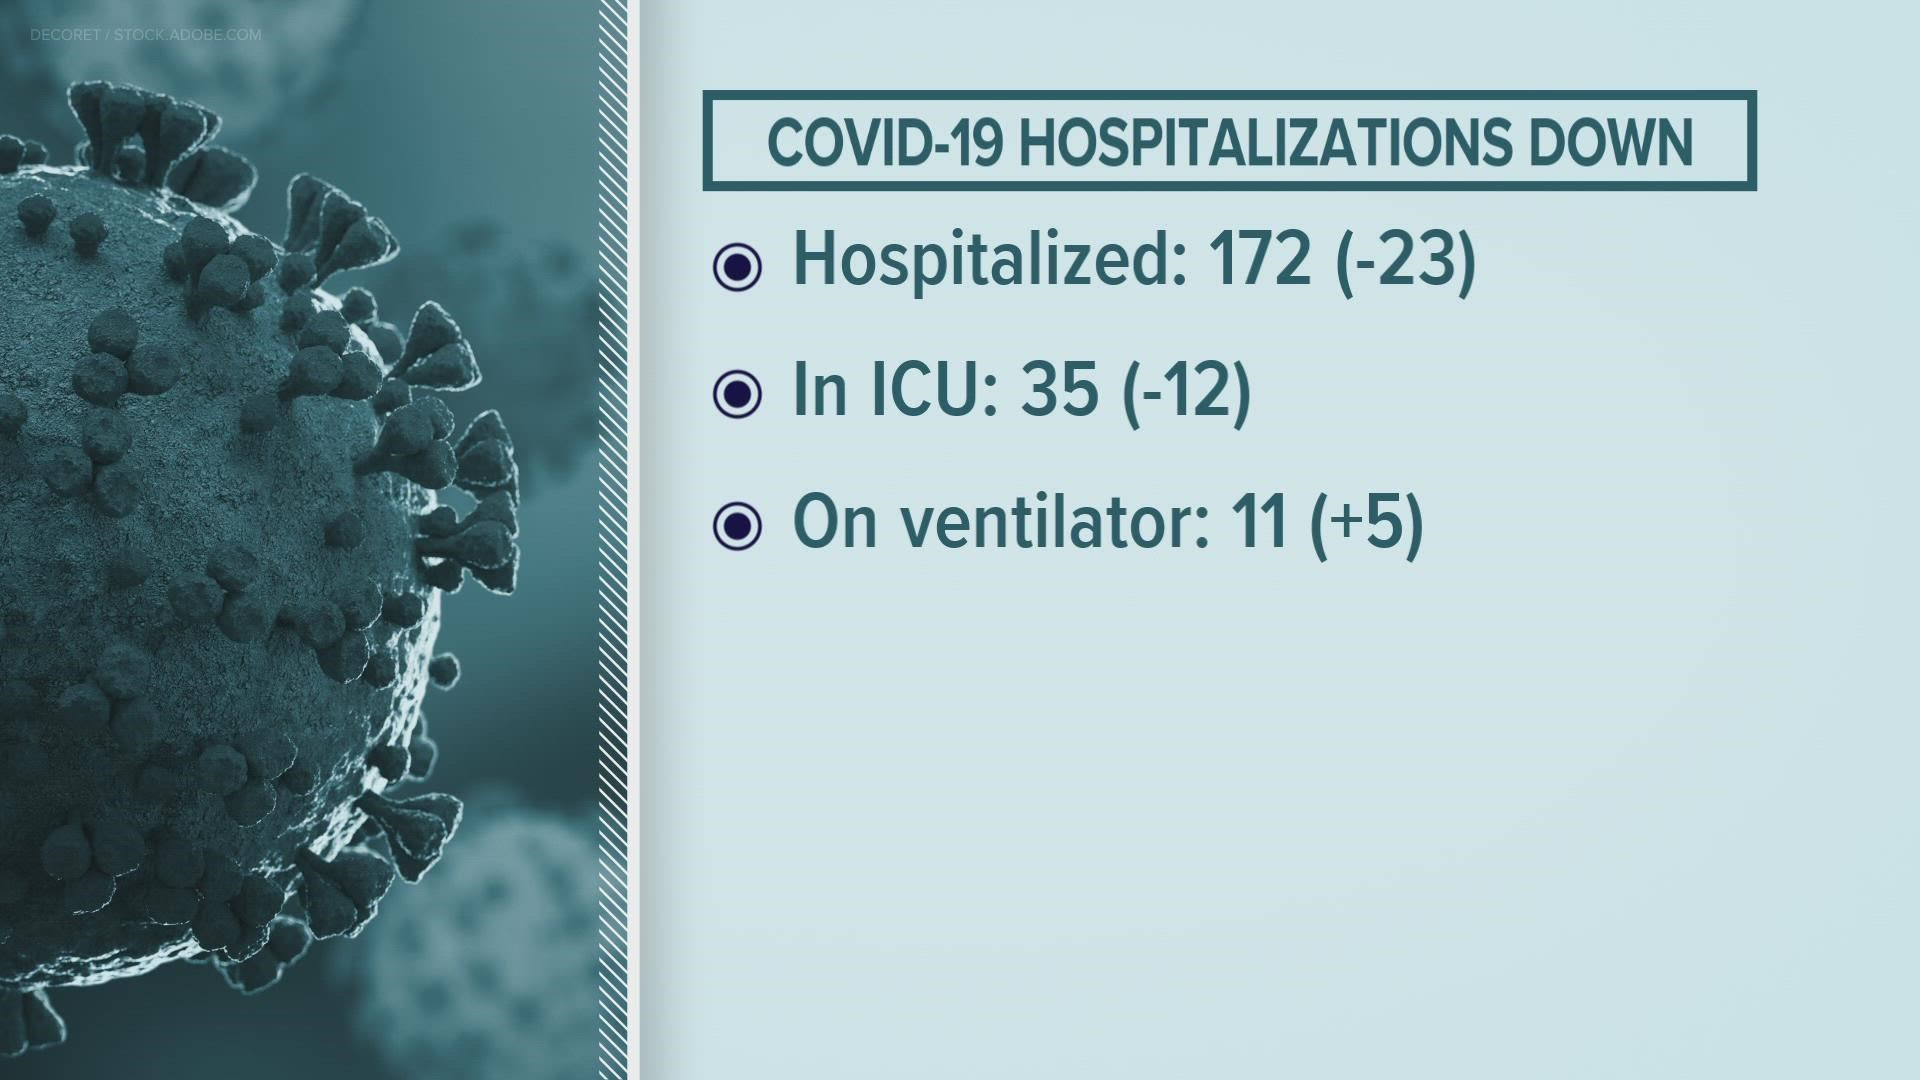 Of hospitalized patients, 35 are in the ICU.